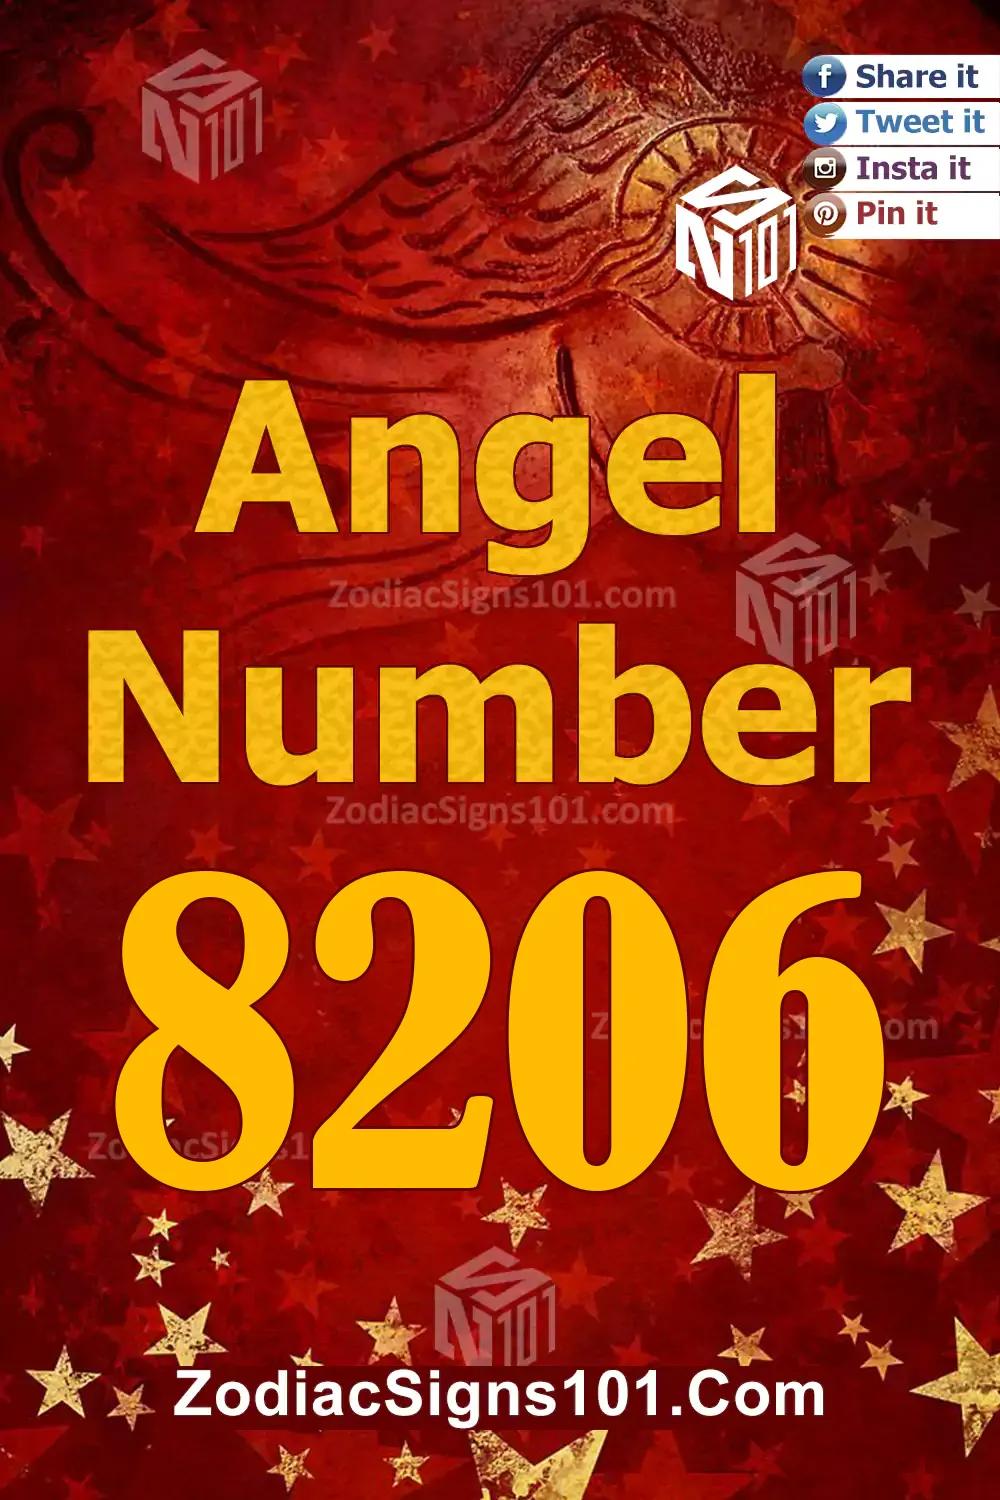 8206 Angel Number Meaning